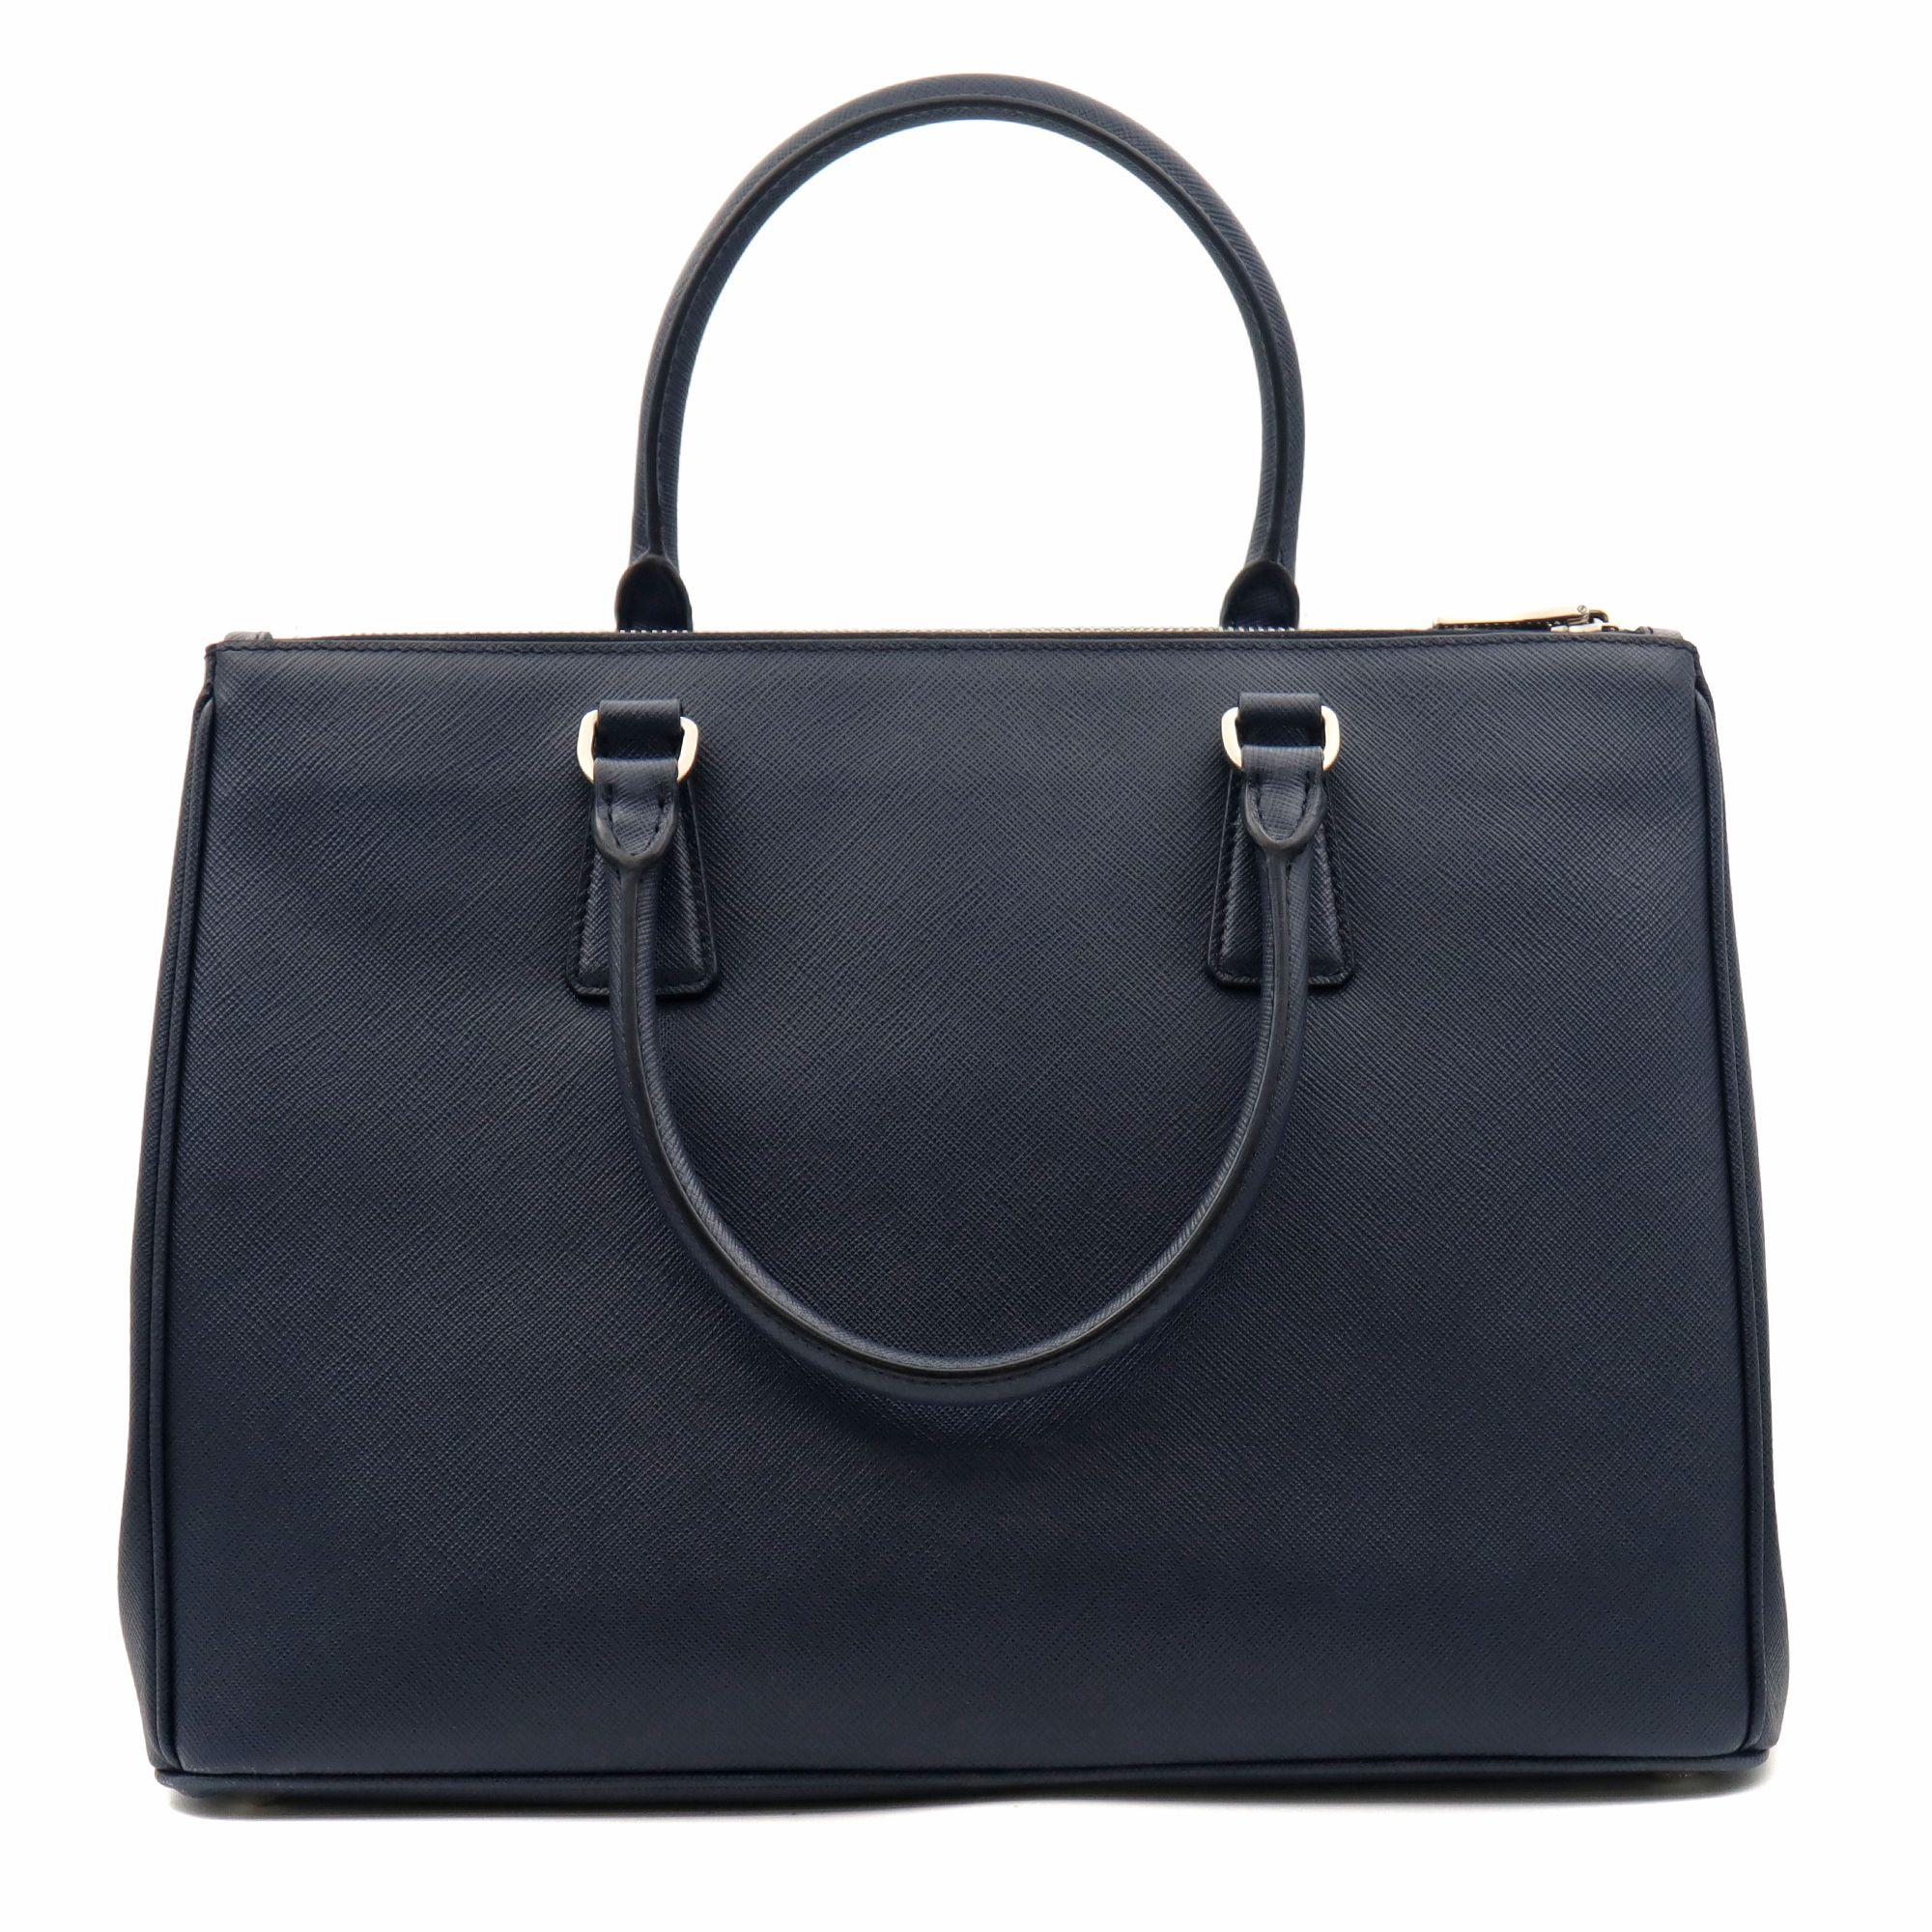 Prada Galleria Saffiano Lux Medium size bag in dark navy blue (Baltico). Model BA274 NZV F0DMH0. This bag prominently showcases a double leather handle and detachable/adjustable shoulder strap. Additional appealing features include silver toned